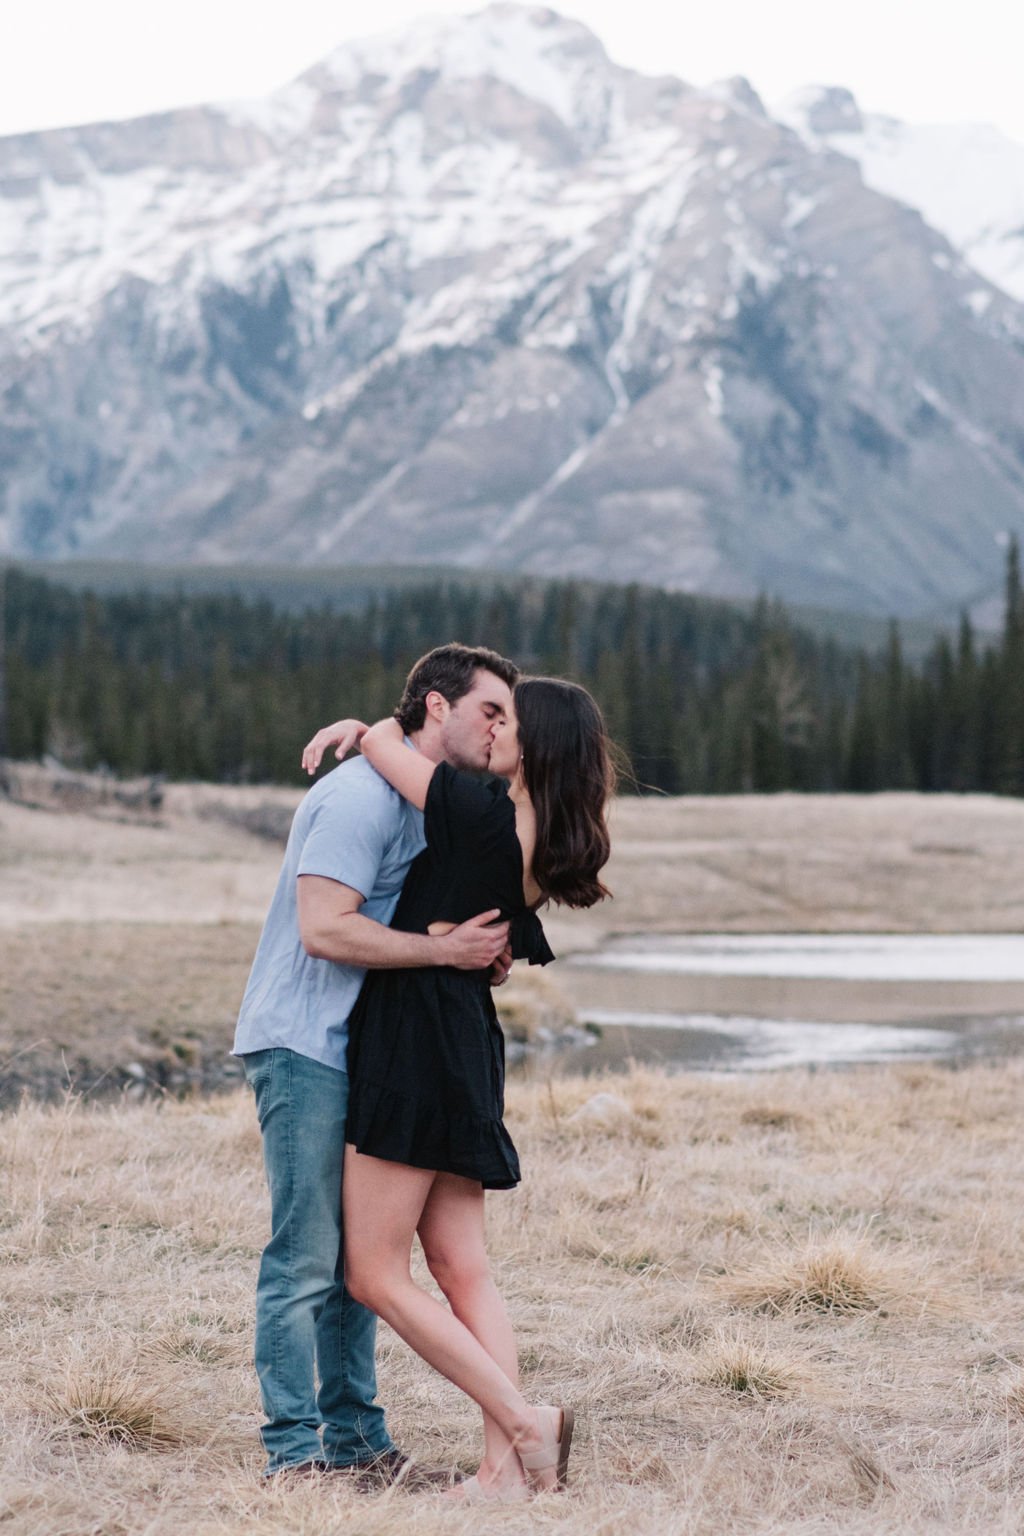 Unforgettable destination engagement session in the beautiful Canadian Rockies photographed by Toronto wedding photographers, Ugo Photography